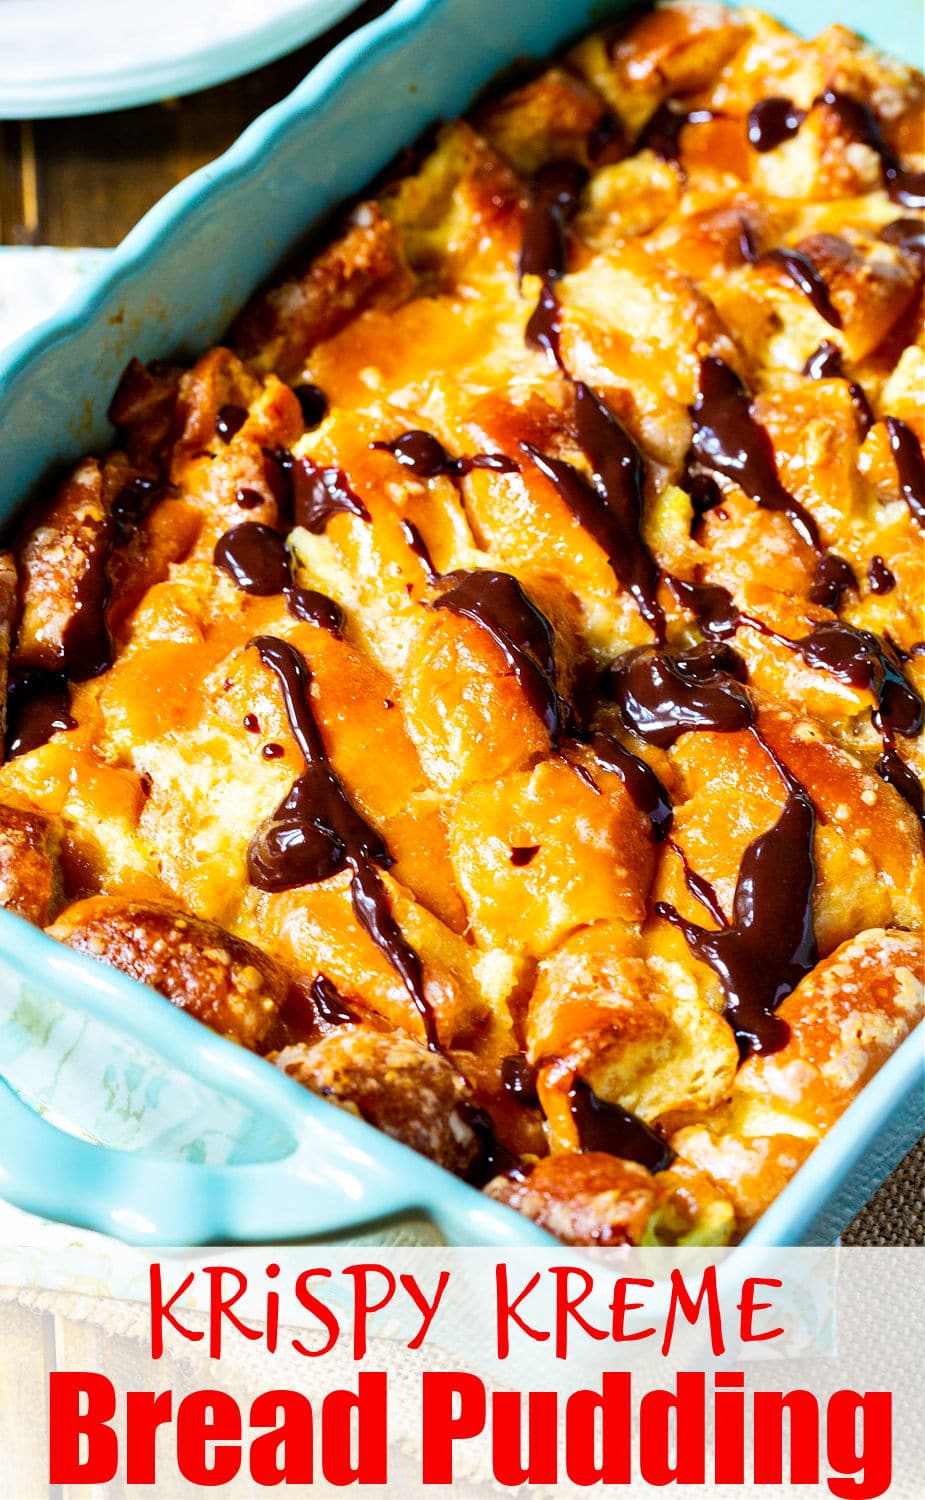 Bread Pudding topped with chocolate sauce.